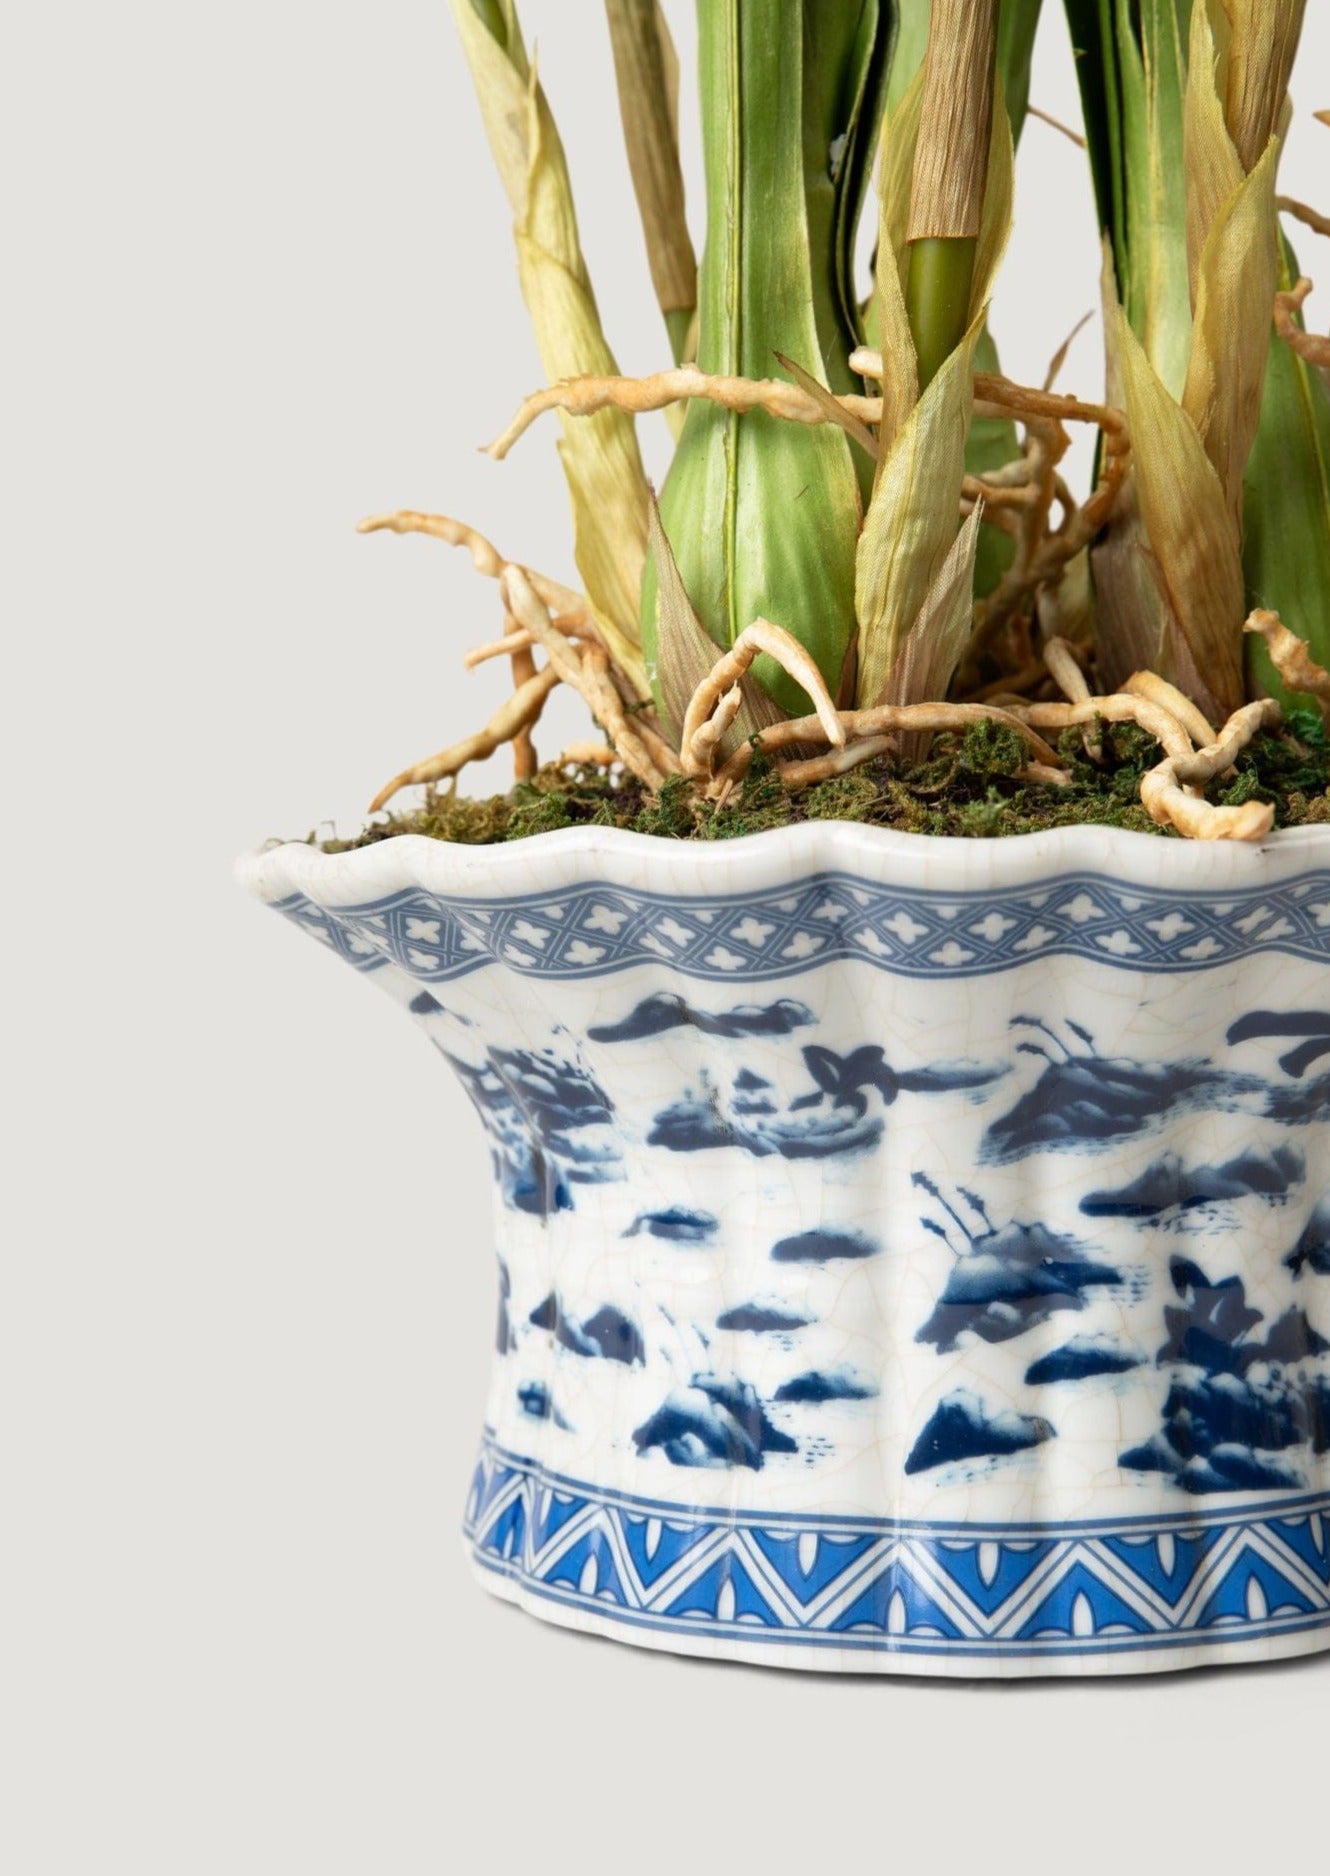 Closeup View of Blue and White Ceramic Pot in Artificial Orchid Arrangement